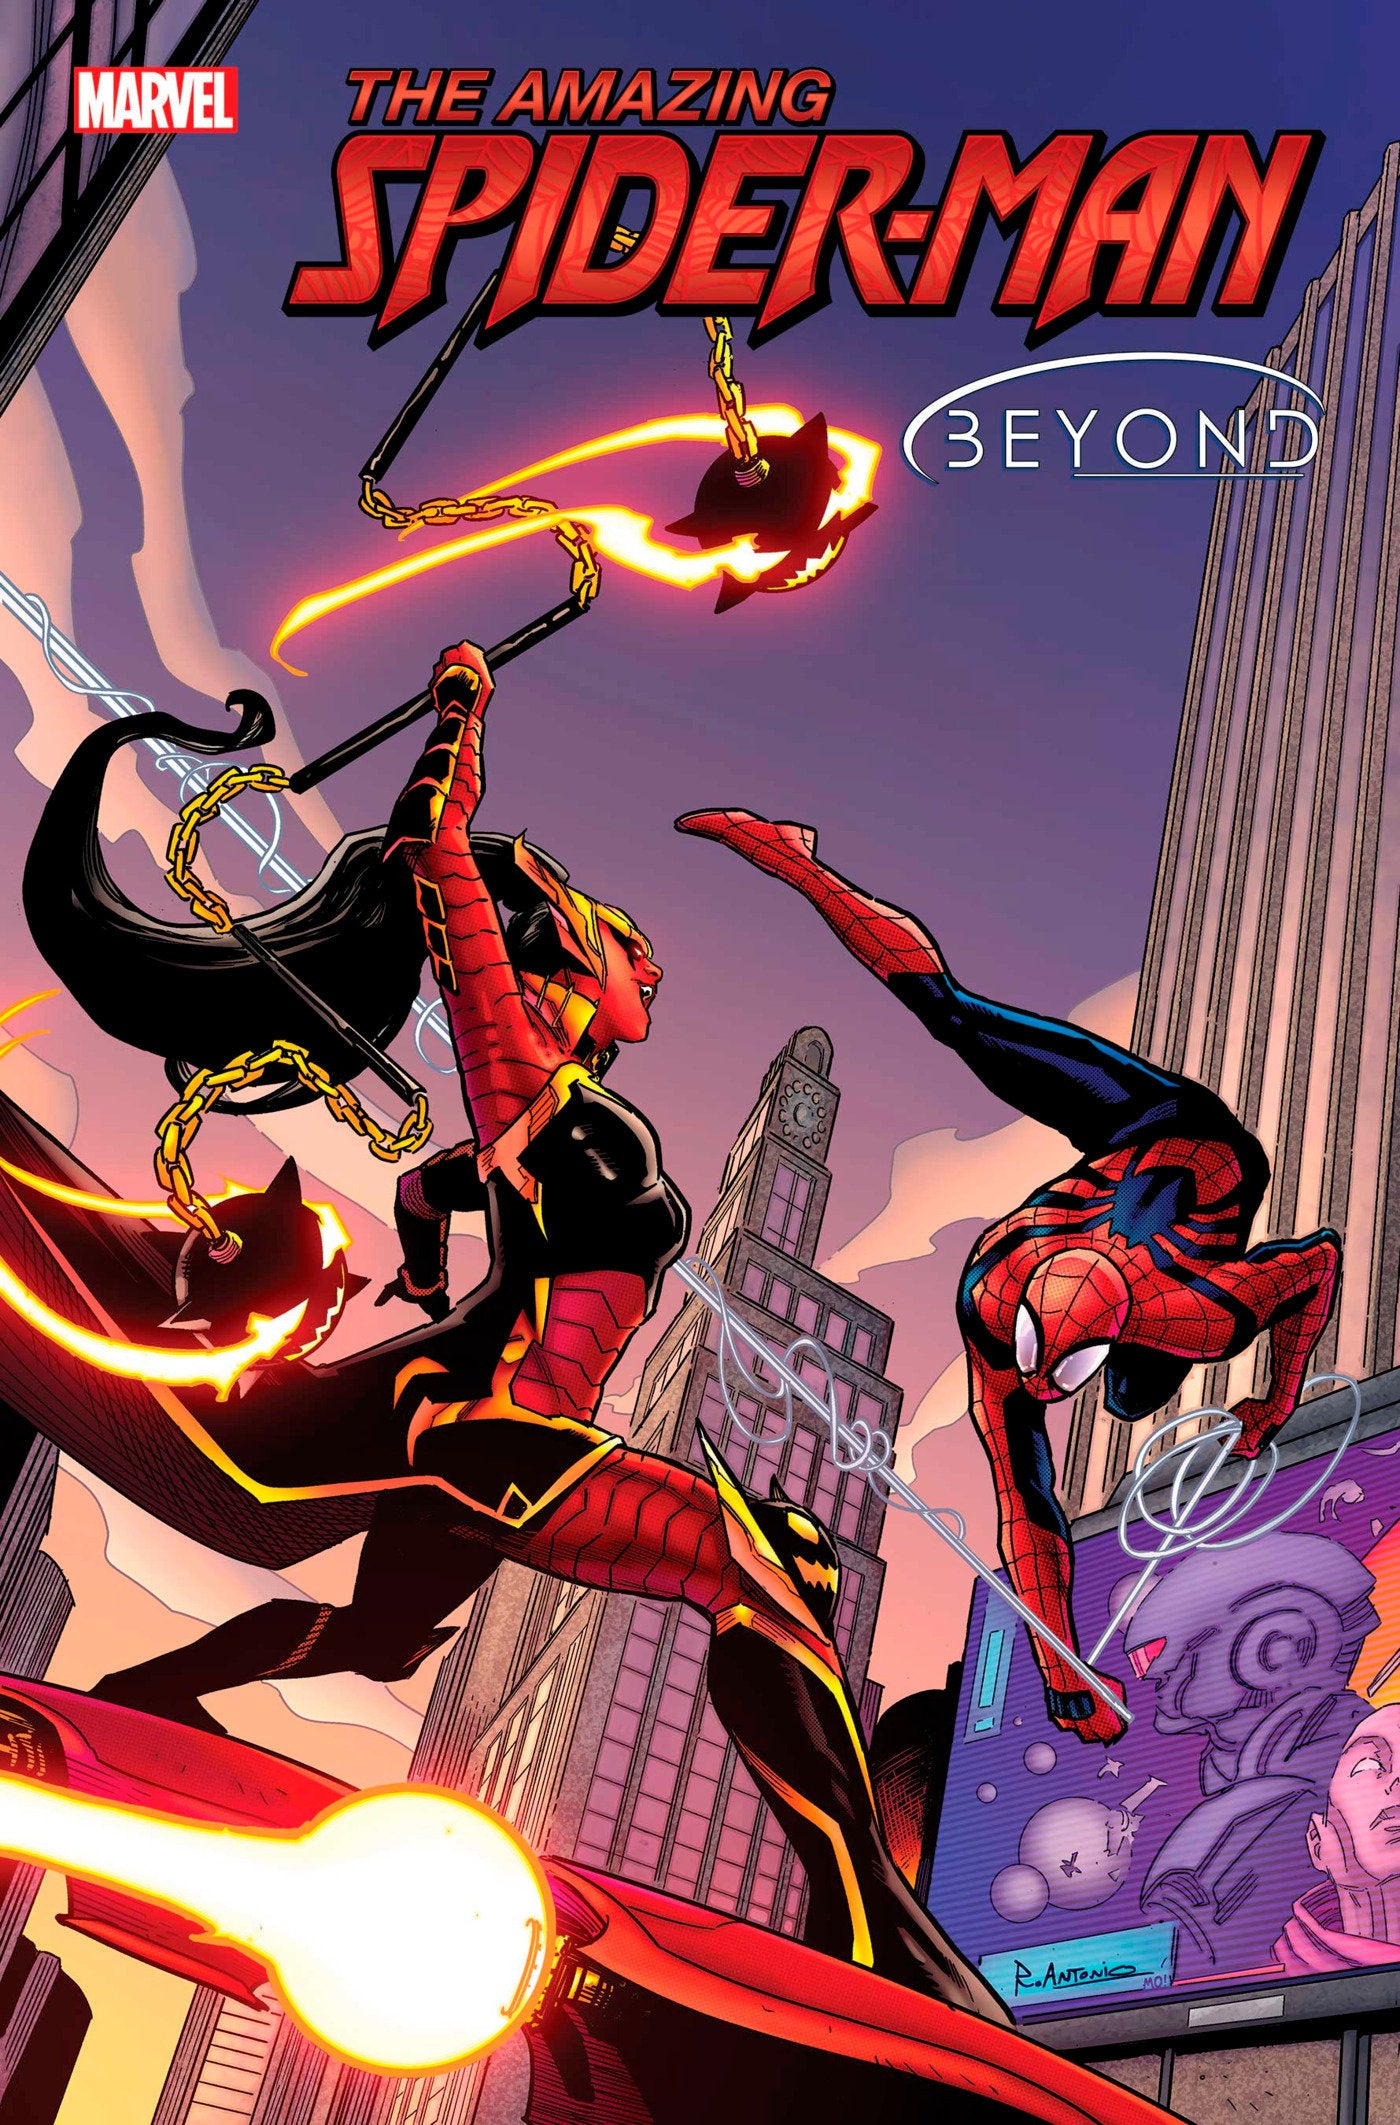 Image of Amazing Spider-Man 90 Antonio Variant comic sold by Stronghold Collectibles.